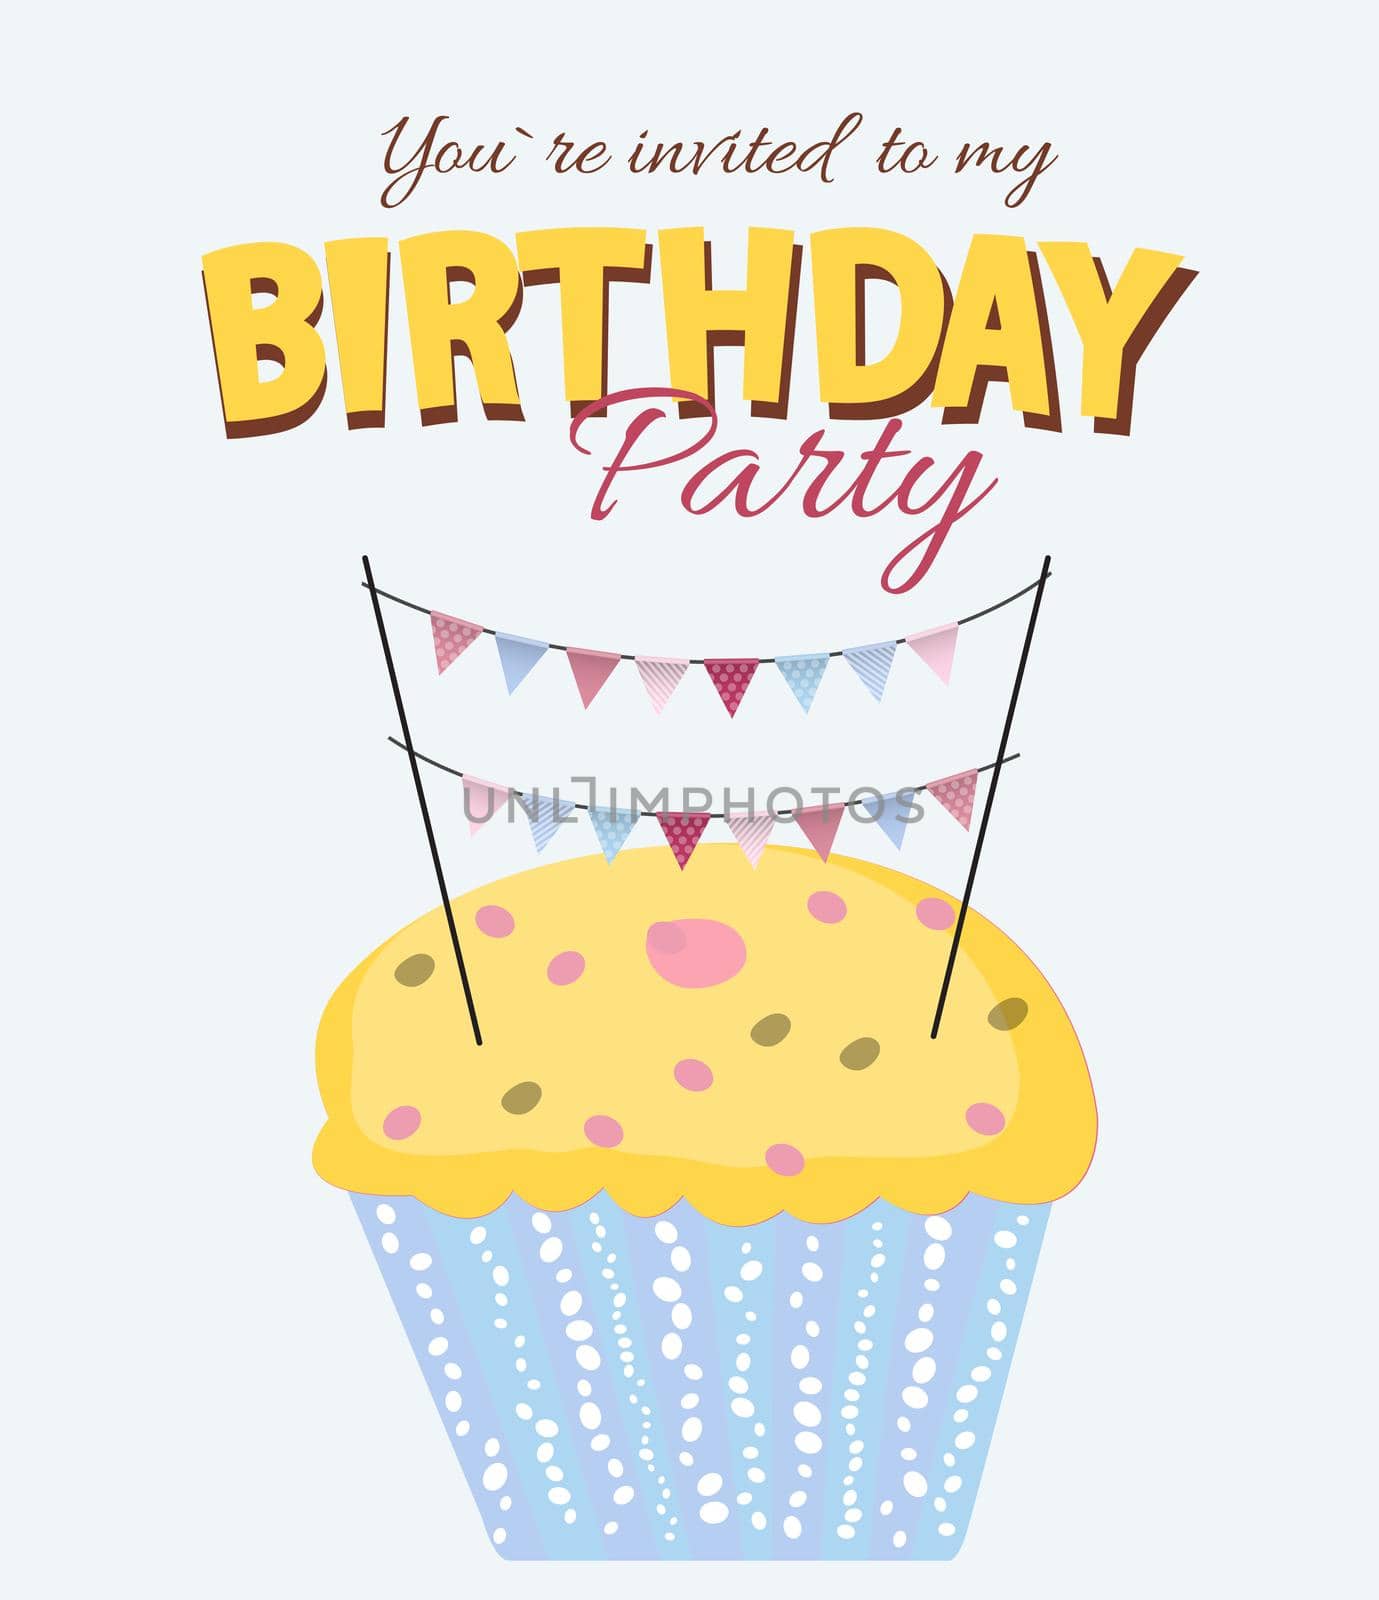 Happy Birthday Card Baner Background with Cake. Vector Illustration EPS10